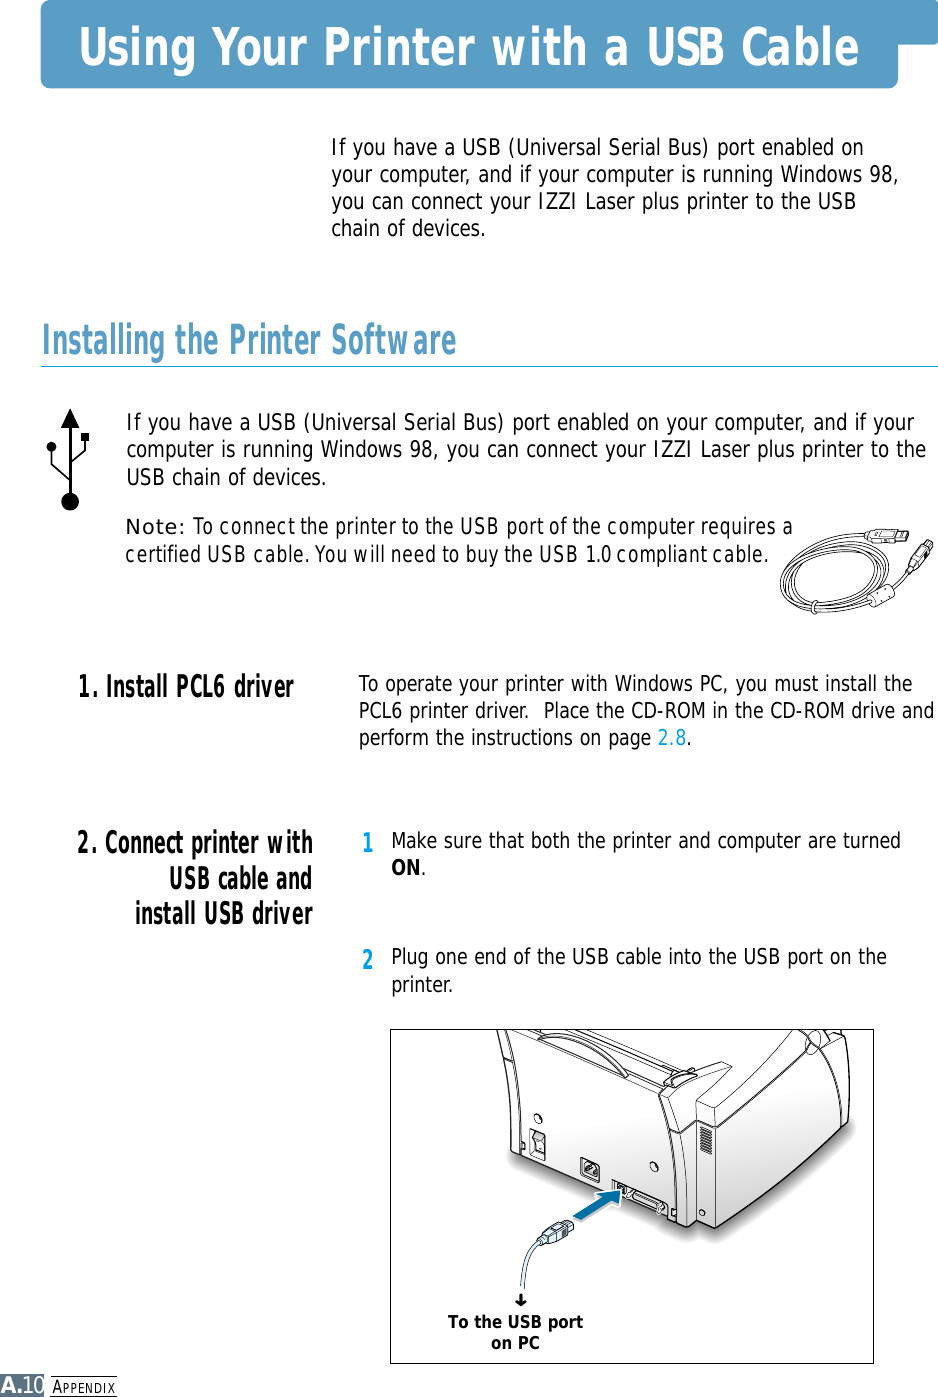 APPENDIXA.10Using Your Printer with a USB CableIf you have a USB (Universal Serial Bus) port enabled on your computer, and if yourcomputer is running Windows 98, you can connect your IZZI Laser plus printer to theUSB chain of devices.Note: To connect the printer to the USB port of the computer requires acertified USB cable. You will need to buy the USB 1.0 compliant cable.To operate your printer with Windows PC, you must install thePCL6 printer driver.  Place the CD-ROM in the CD-ROM drive andperform the instructions on page 2.8.If you have a USB (Universal Serial Bus) port enabled onyour computer, and if your computer is running Windows 98,you can connect your IZZI Laser plus printer to the USBchain of devices.1Make sure that both the printer and computer are turnedON.2Plug one end of the USB cable into the USB port on theprinter.2. Connect printer withUSB cable andinstall USB driver1. Install PCL6 driver Installing the Printer SoftwareTo the USB porton PC➜